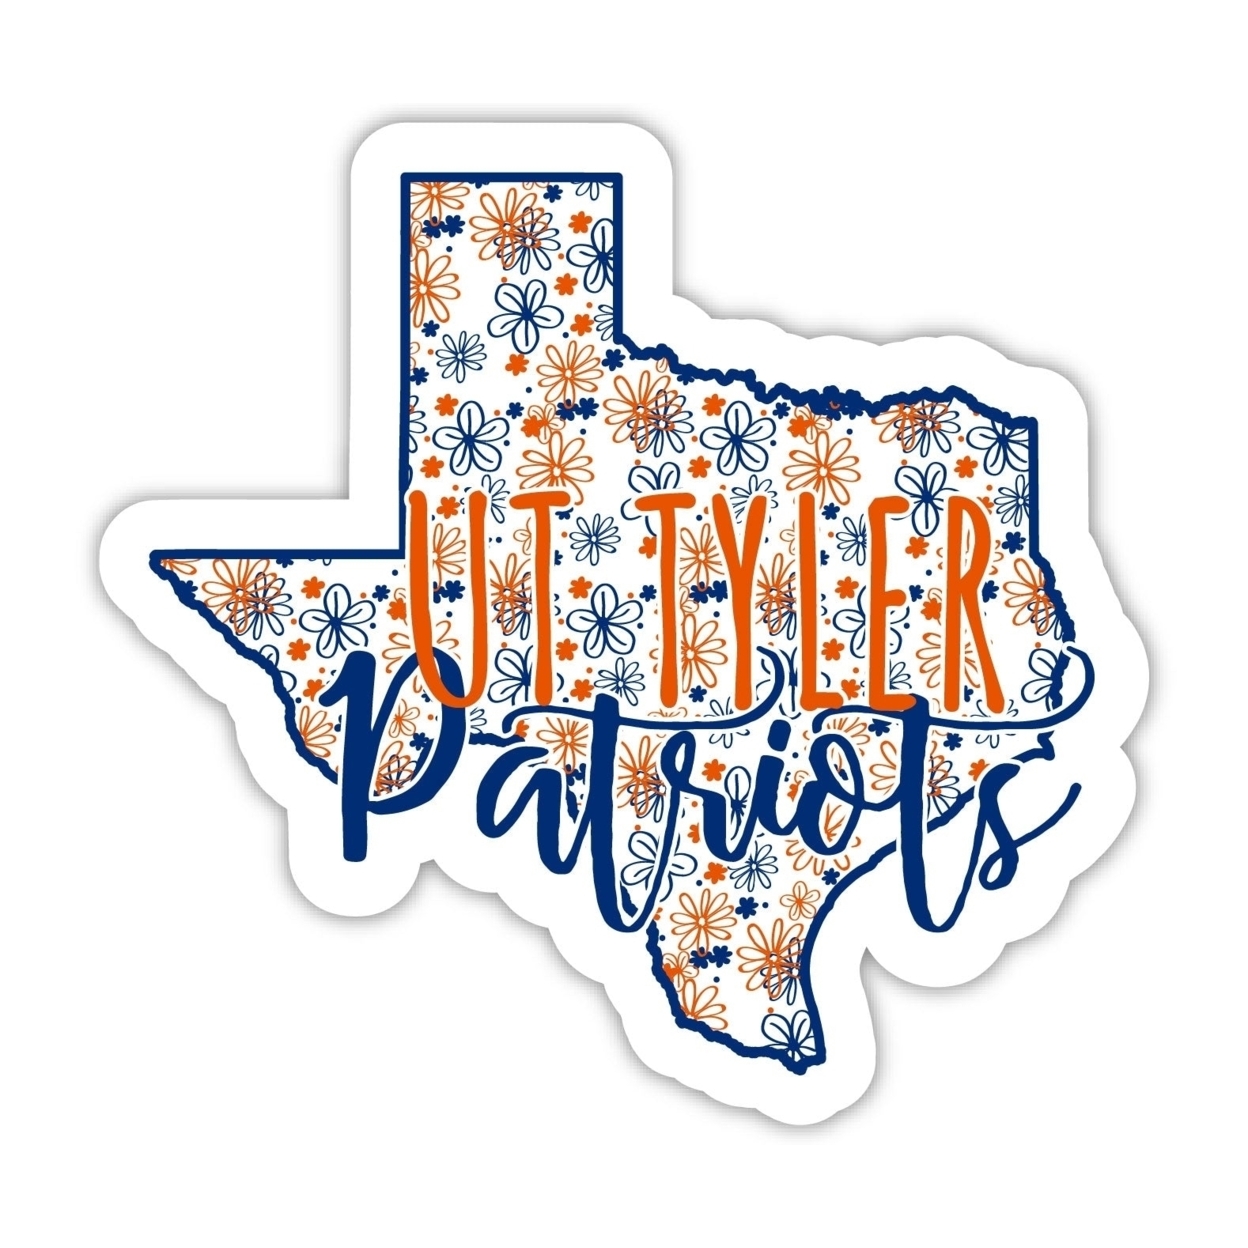 The University Of Texas At Tyler Floral State Die Cut Decal 4-Inch